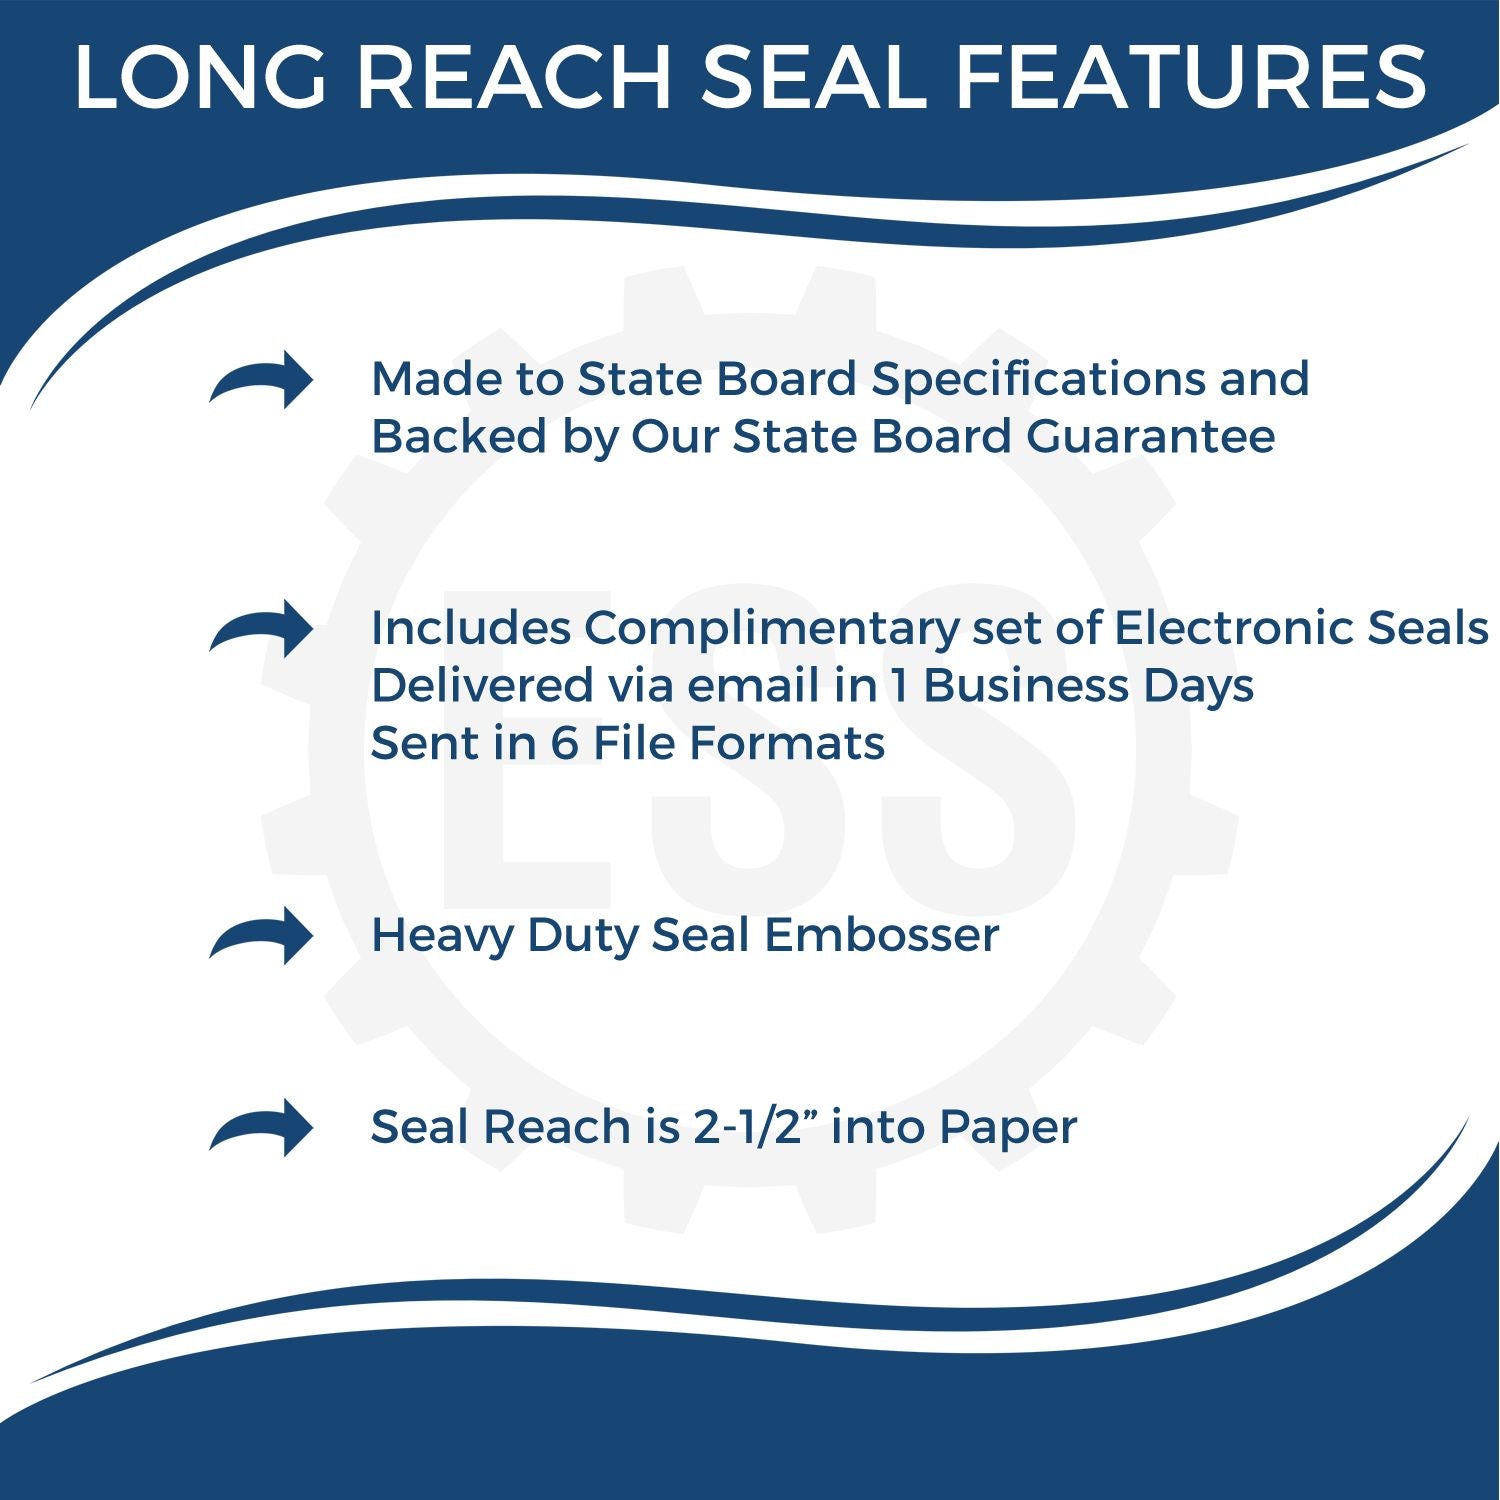 The main image for the Long Reach Delaware PE Seal depicting a sample of the imprint and electronic files